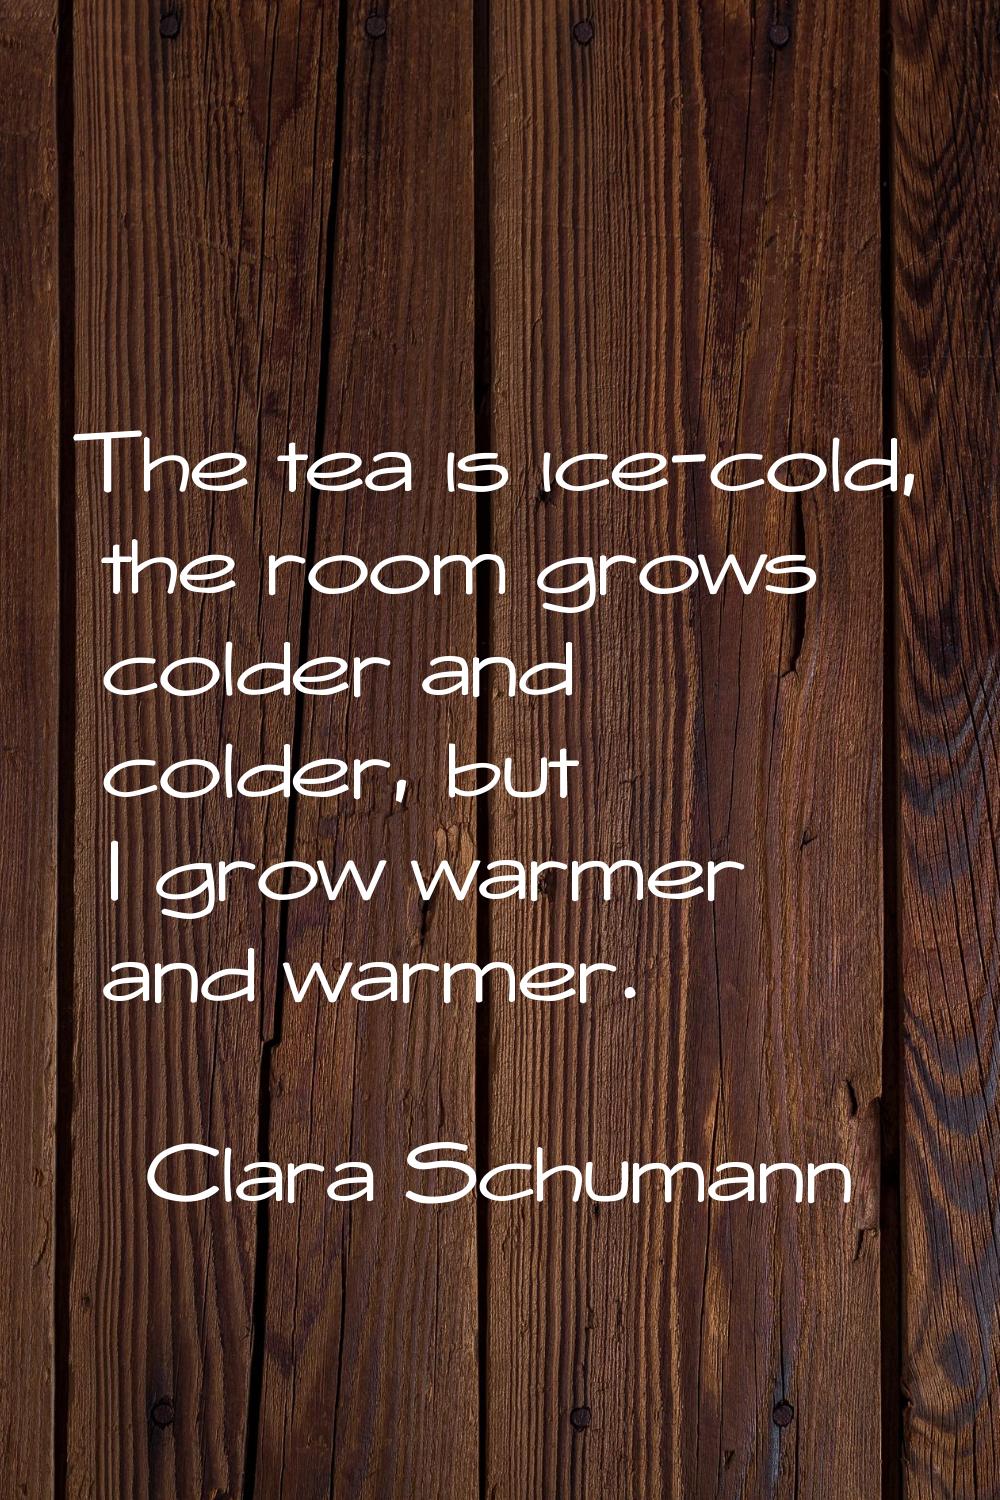 The tea is ice-cold, the room grows colder and colder, but I grow warmer and warmer.